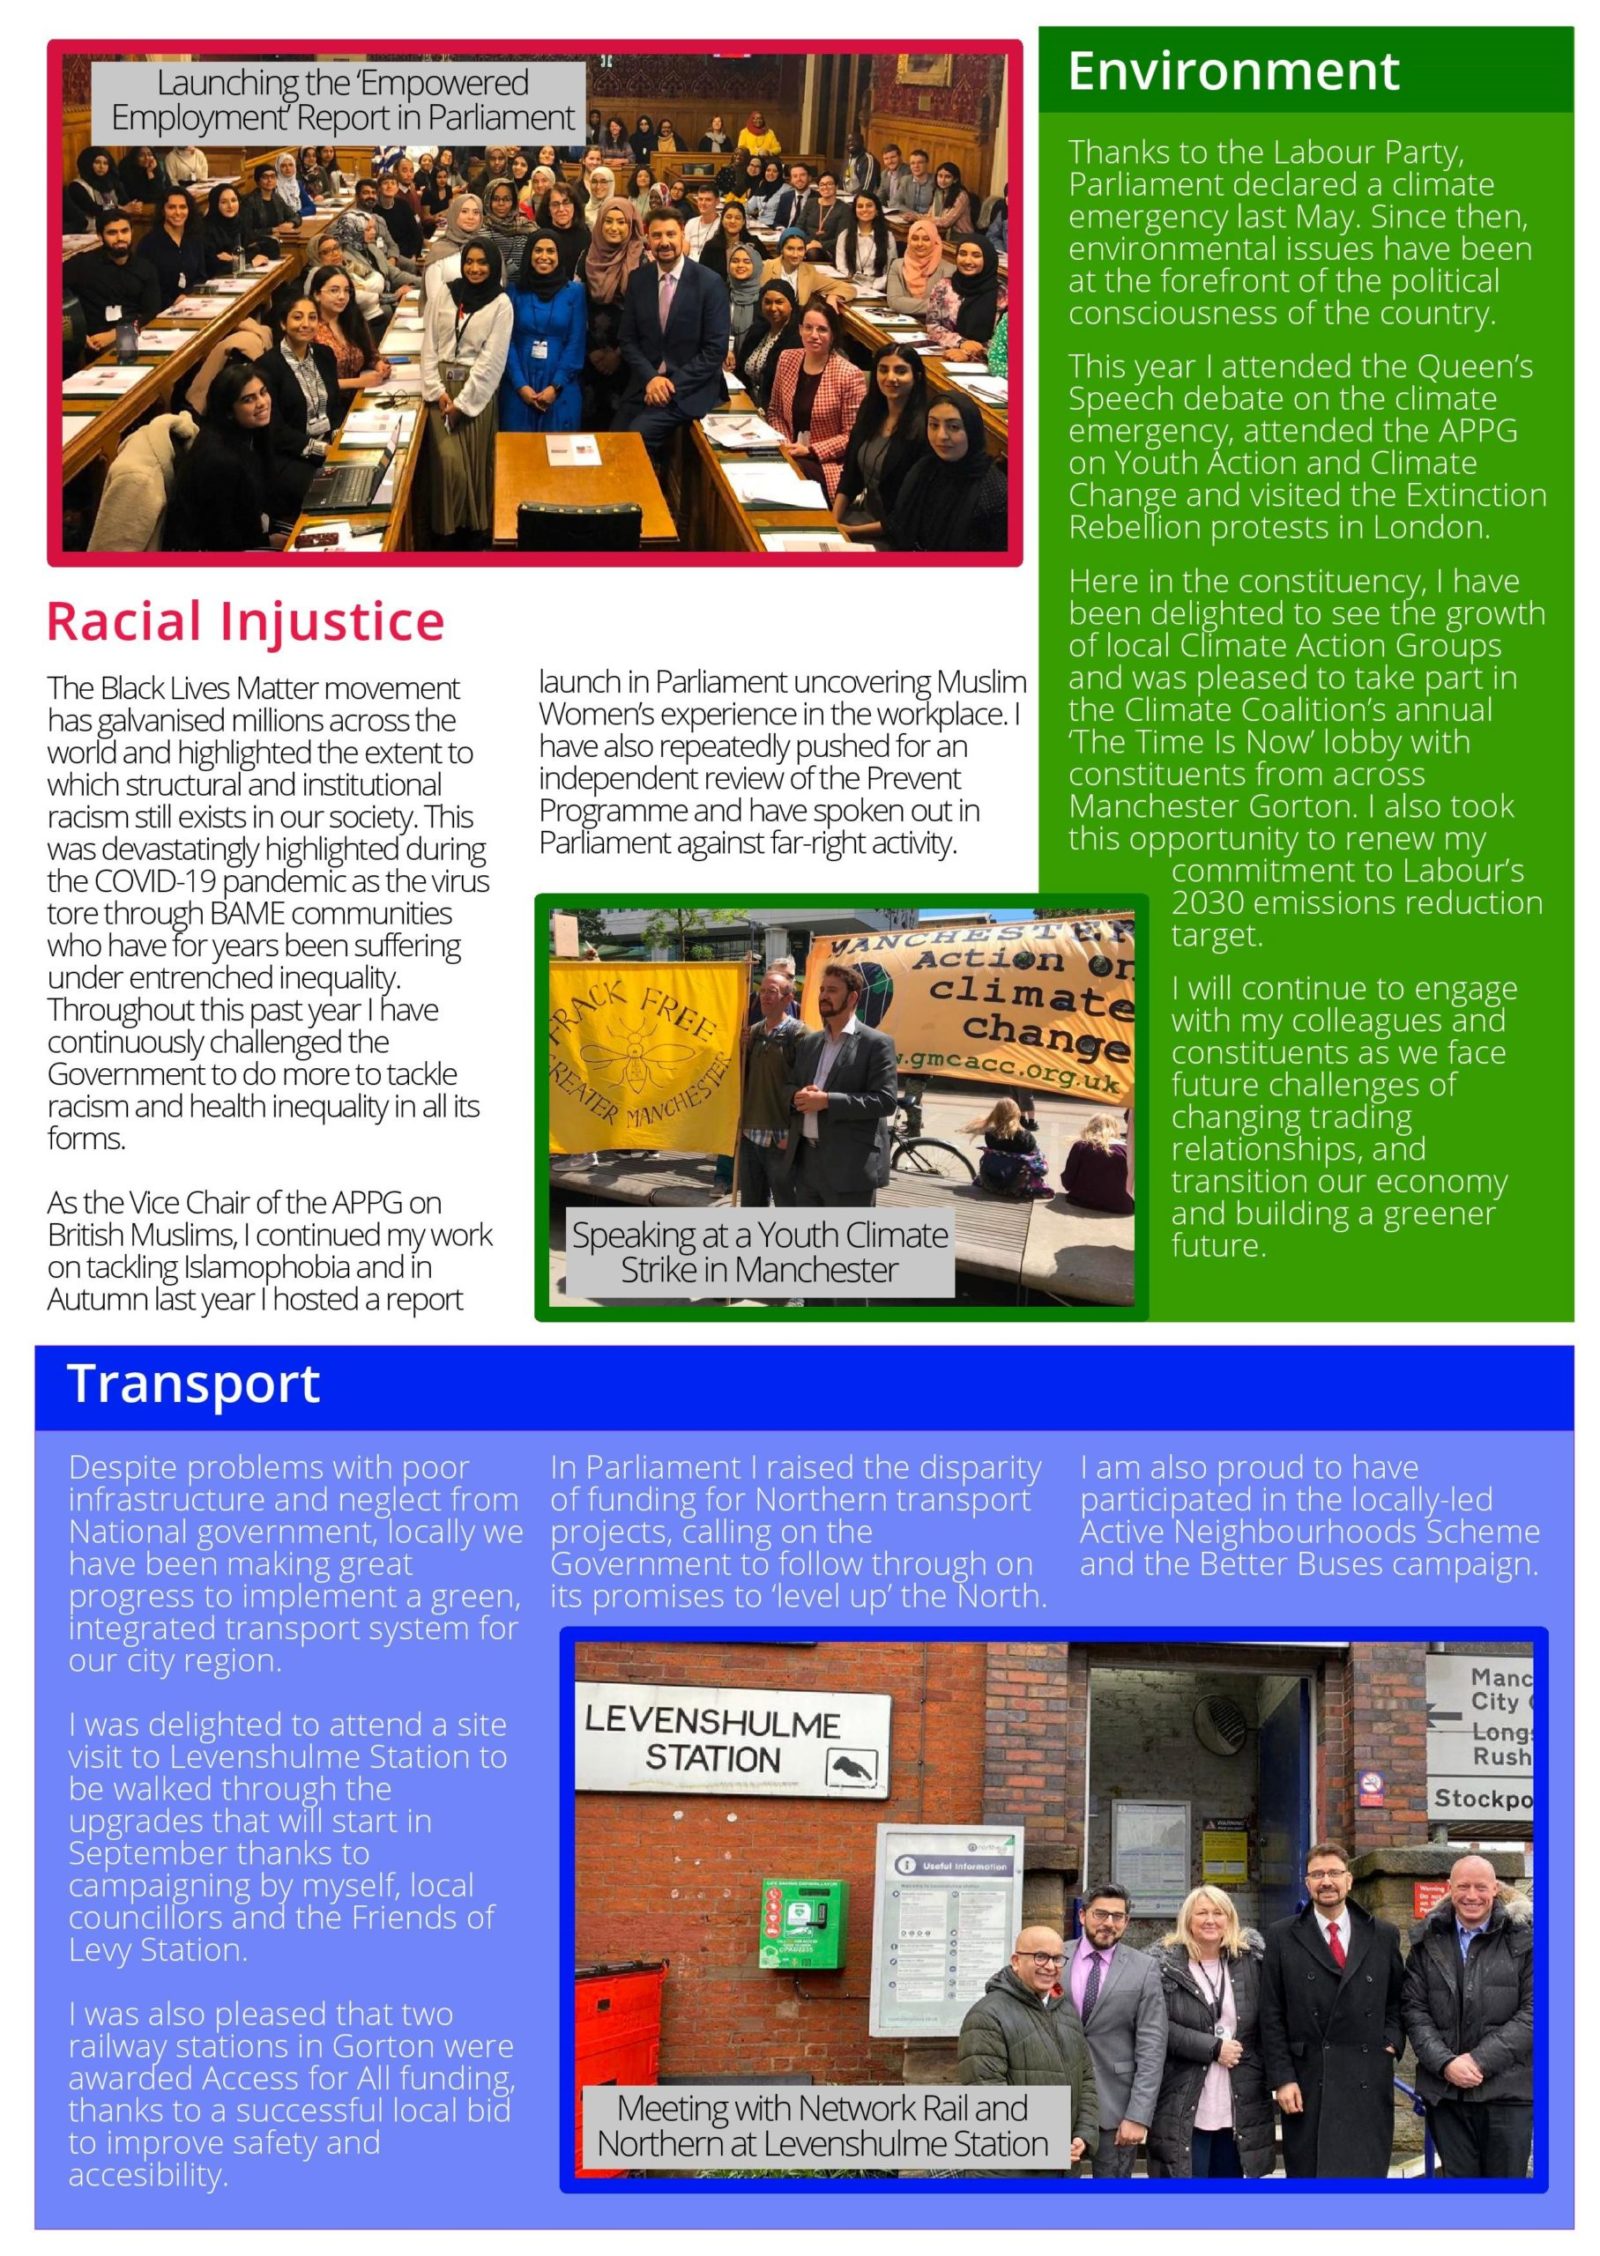 Annual report page 3